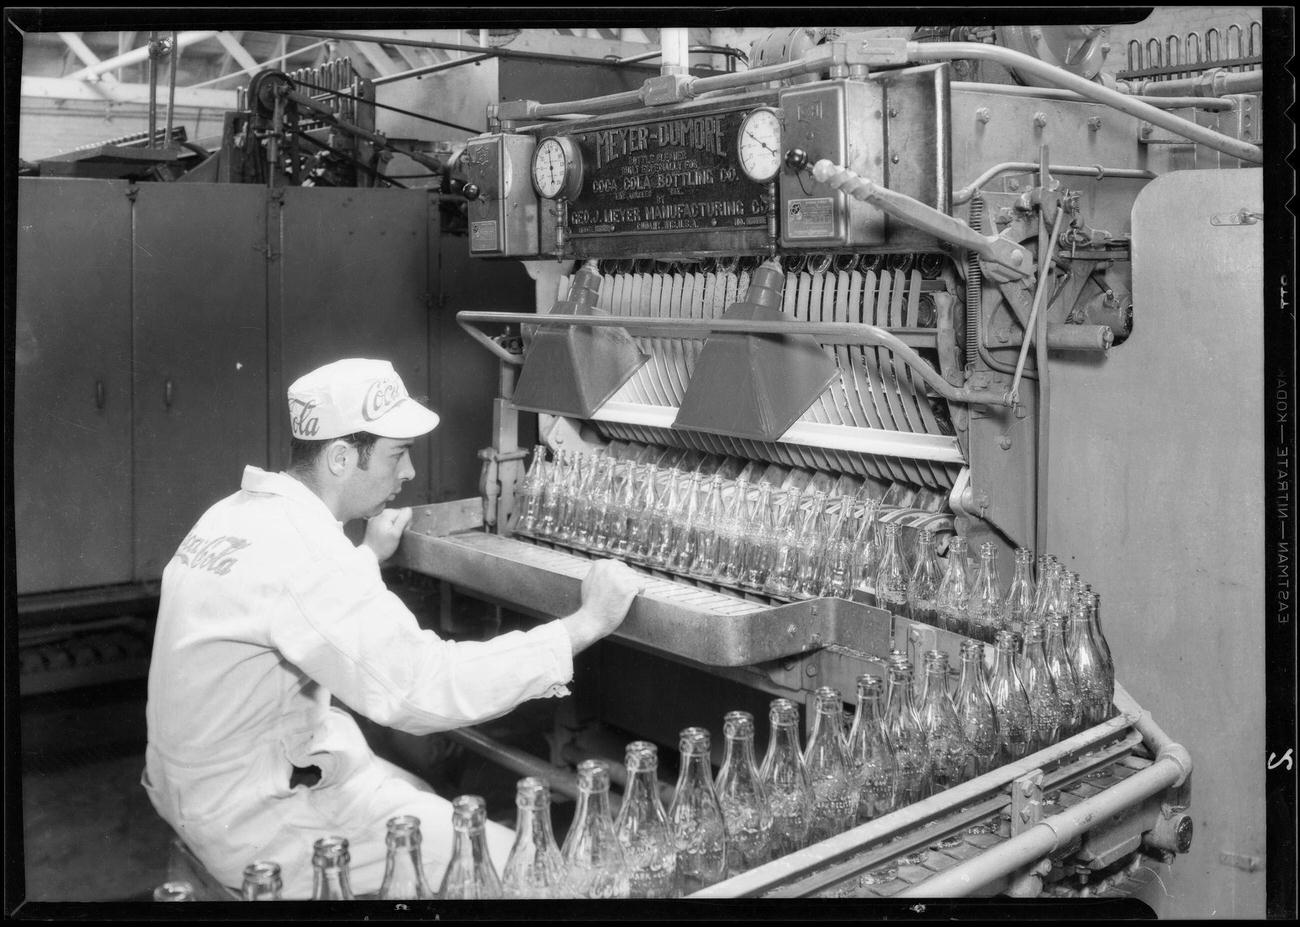 Bottle inspection operations at a Coca-Cola plant in Southern California, 1933.